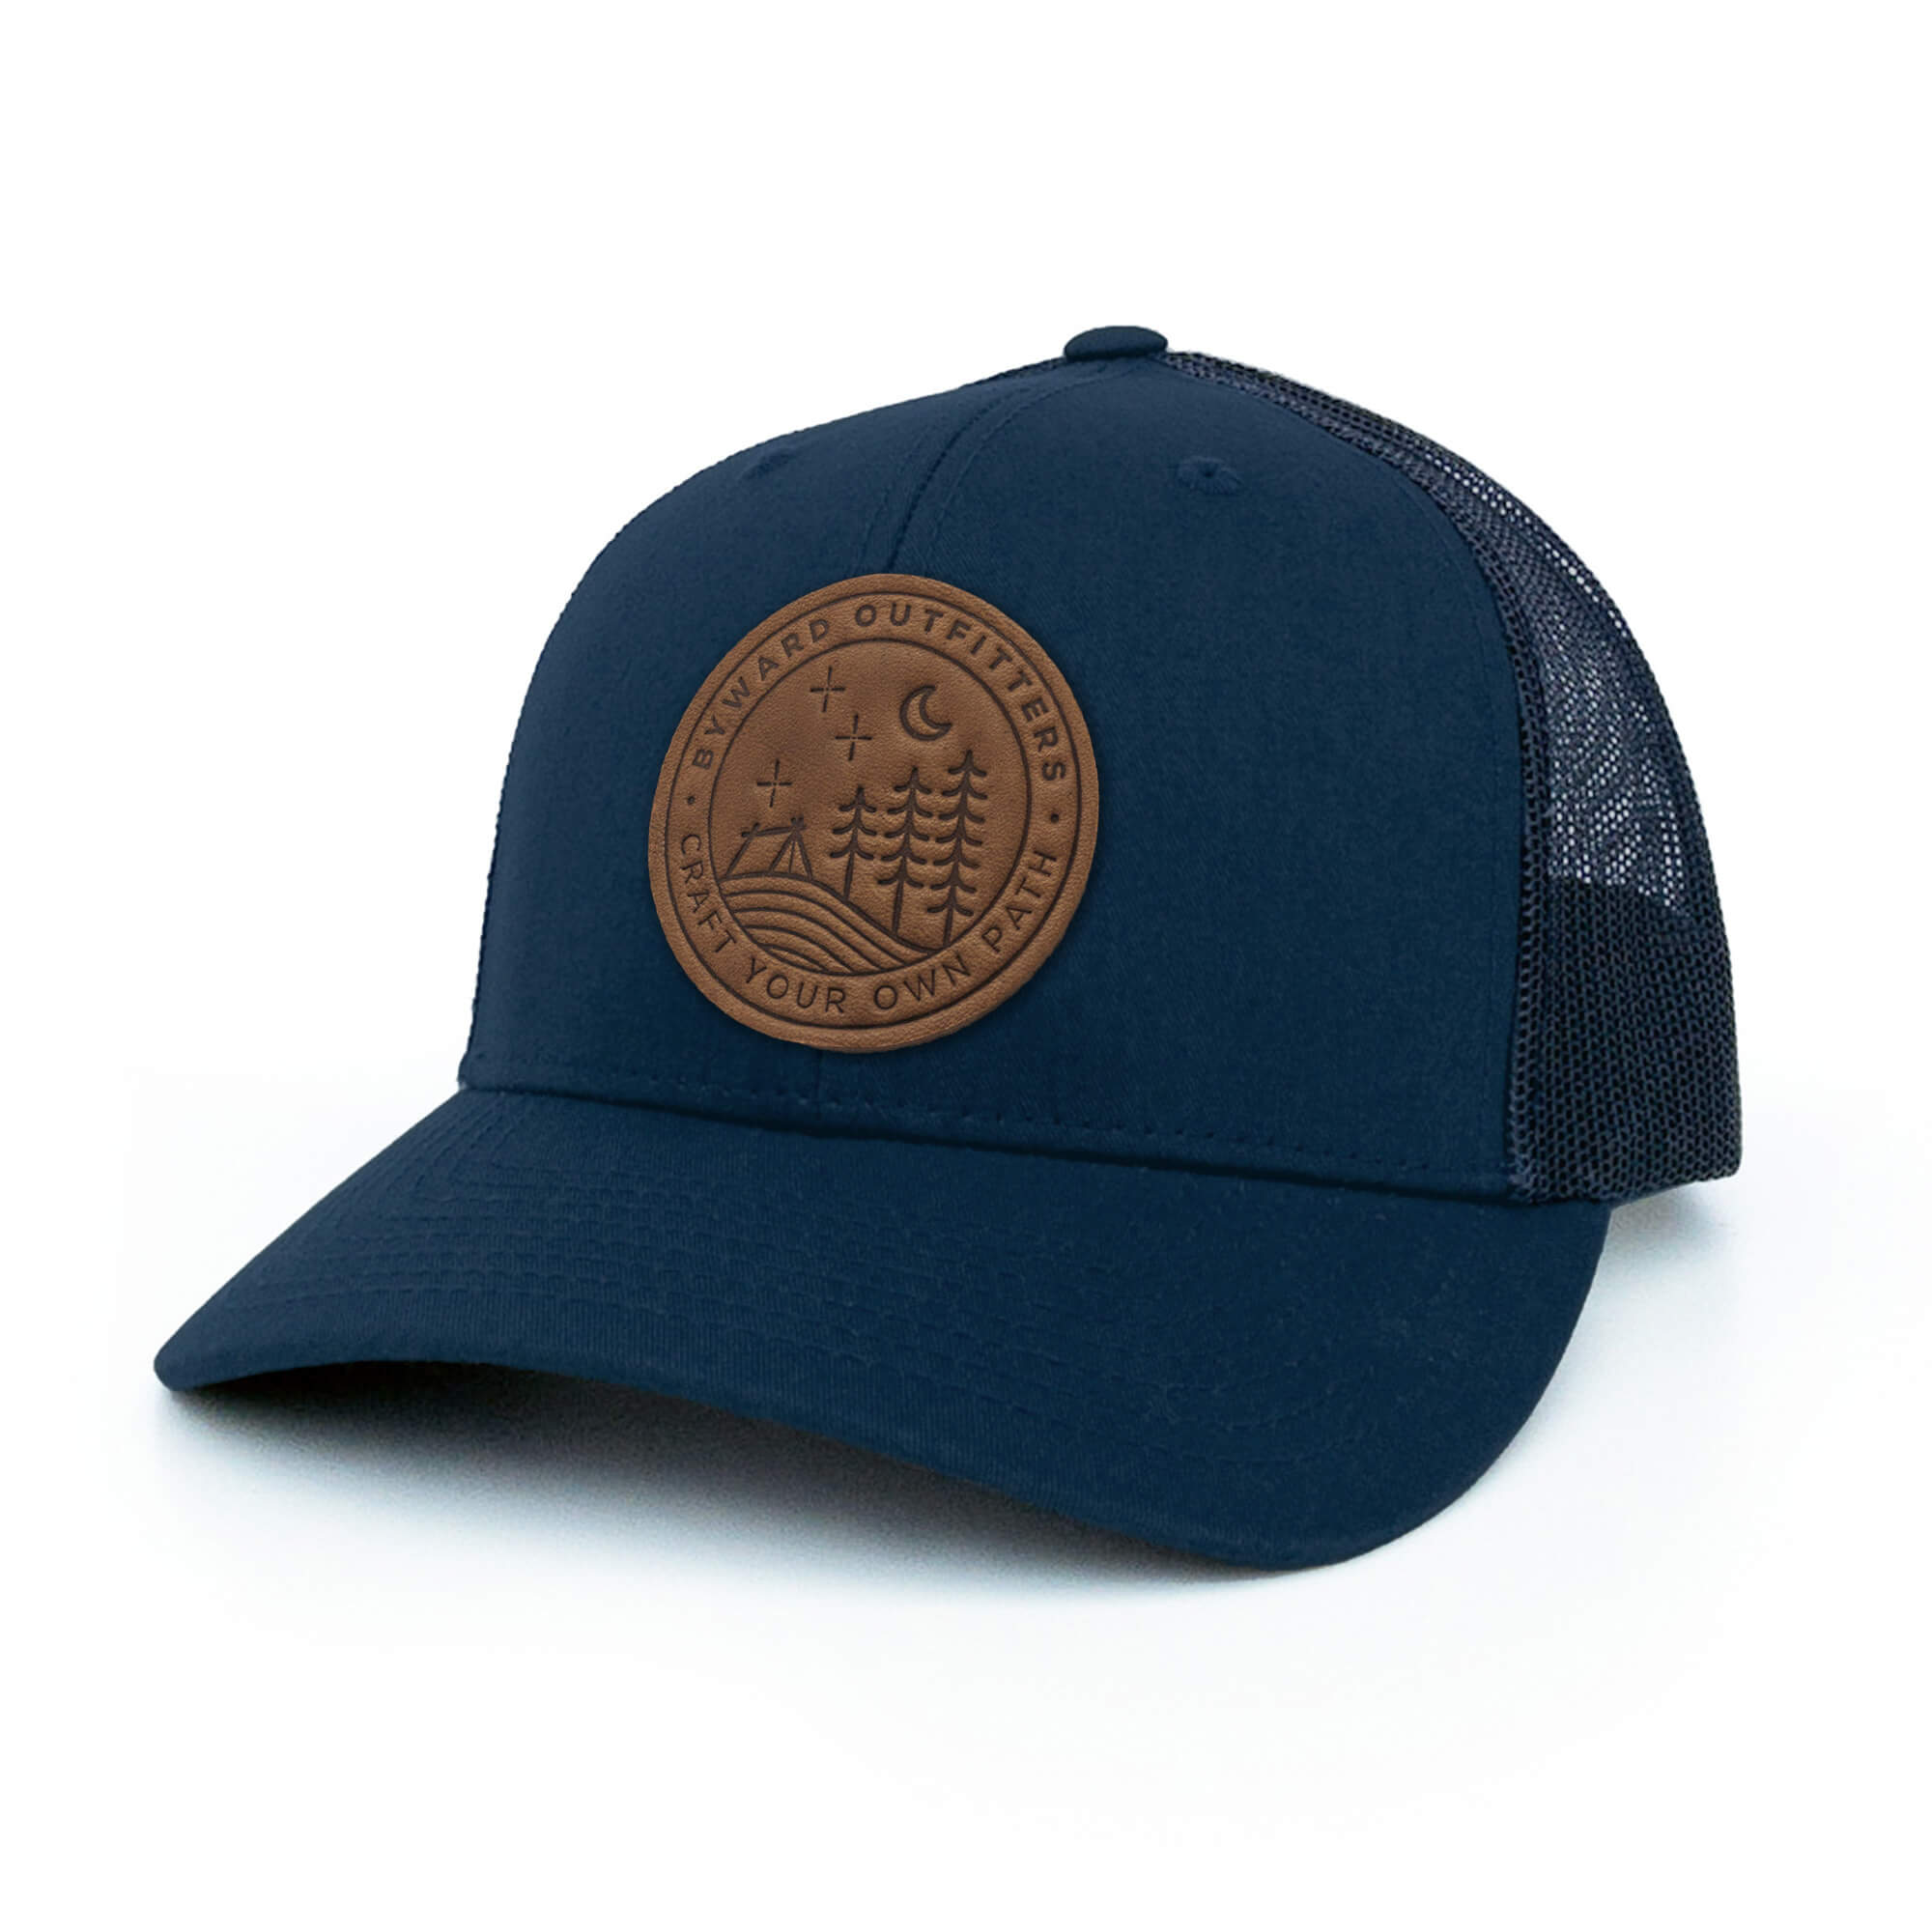 Navy trucker hat with full-grain leather patch of Stellar Night | BLACK-005-001, CHARC-005-001, NAVY-005-001, HGREY-005-001, MOSS-005-001, BROWN-005-001